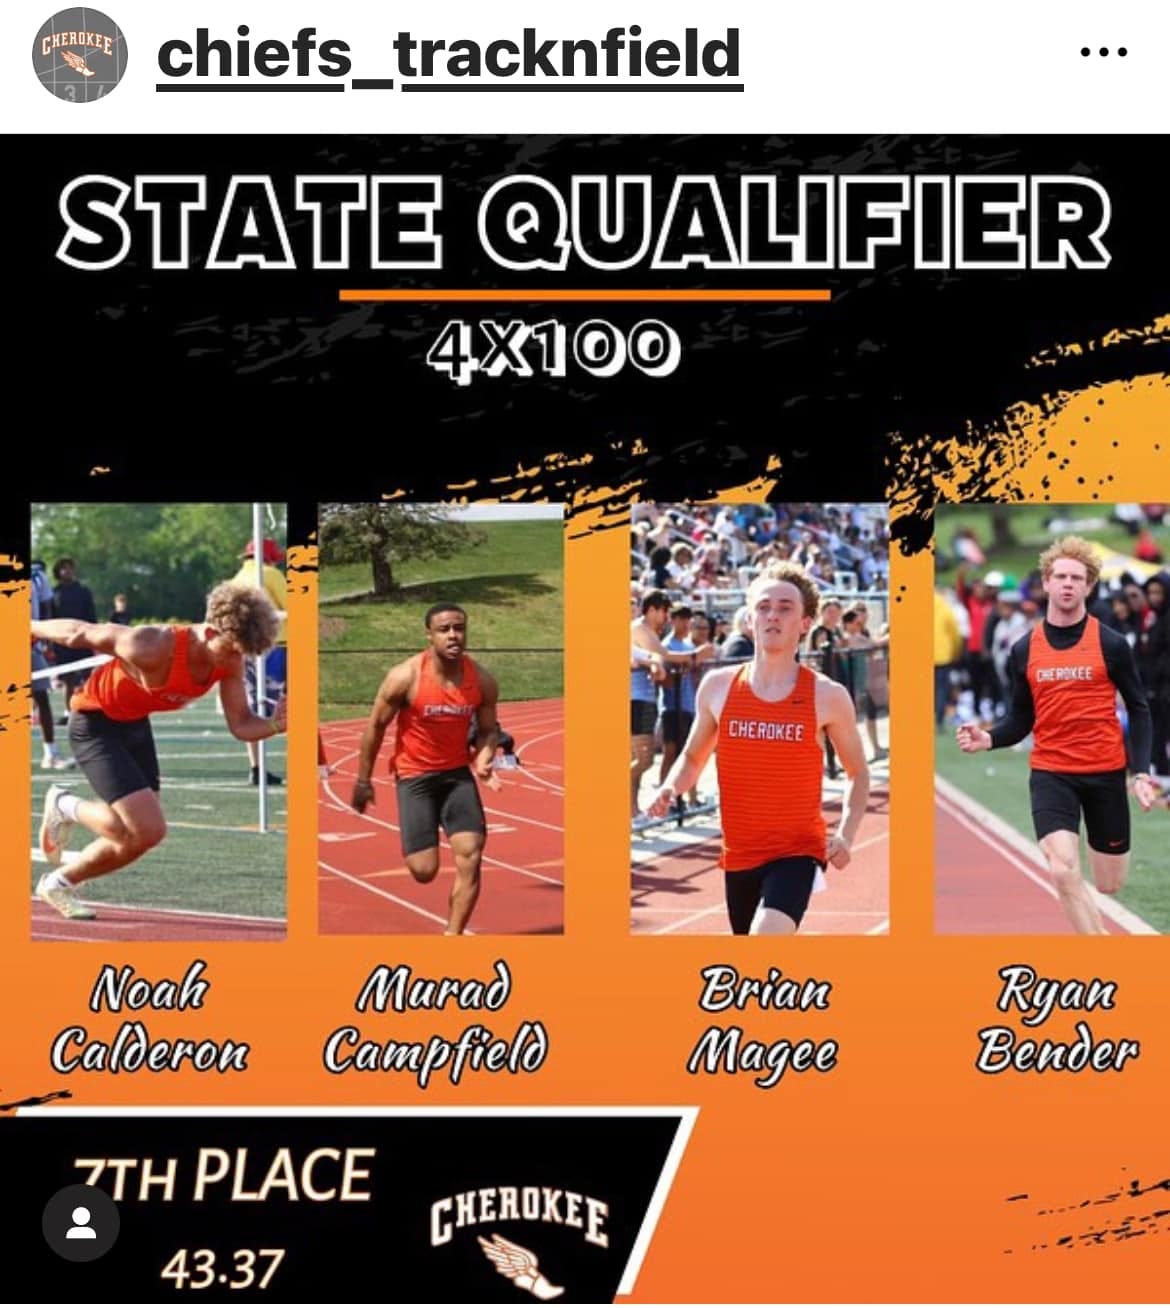 May be an image of 5 people, track and field and text that says 'CEHCKEE chiefs_tracknfield · STATE QUALIFIER 4X100 DIEROKEE CHEROKEE Noah Calderon Murad Campfield Brian Magee 7TH PLACE Ryan Bender 43.37 CИEHOKEE'